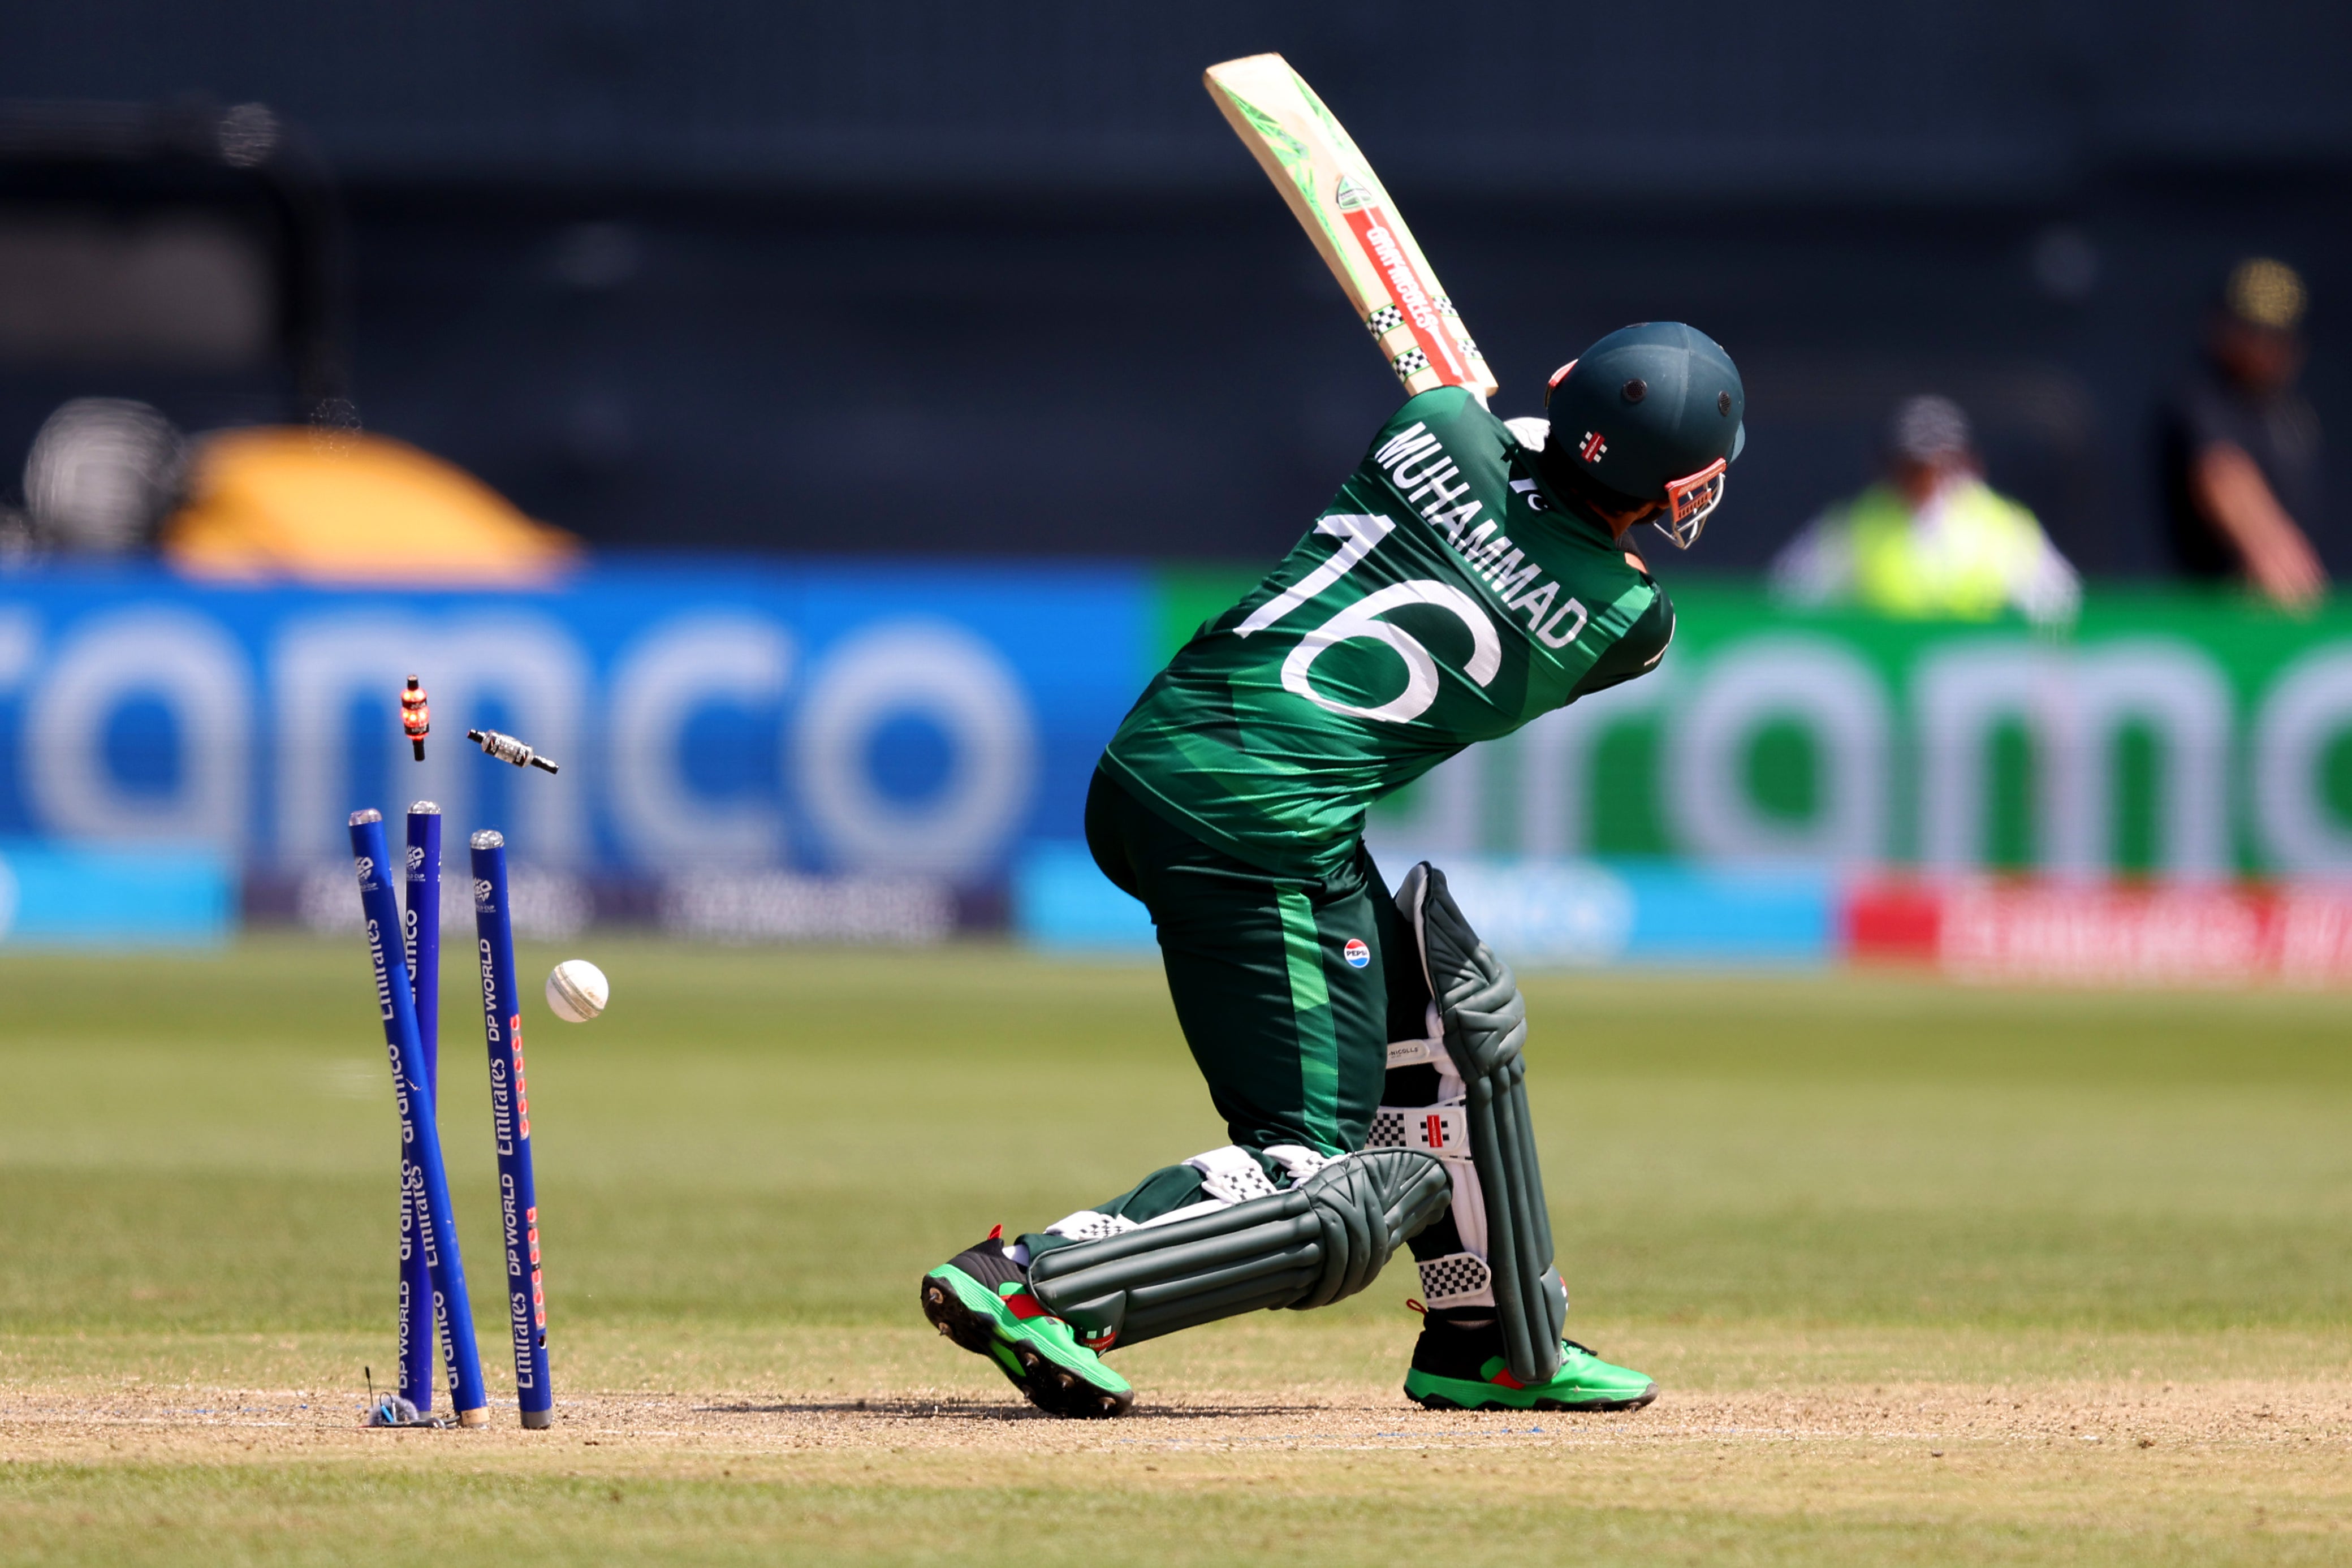 babar azam, pakistan cricket, t20 world cup, babar azam admits batting let pakistan down at t20 world cup and urges rethink